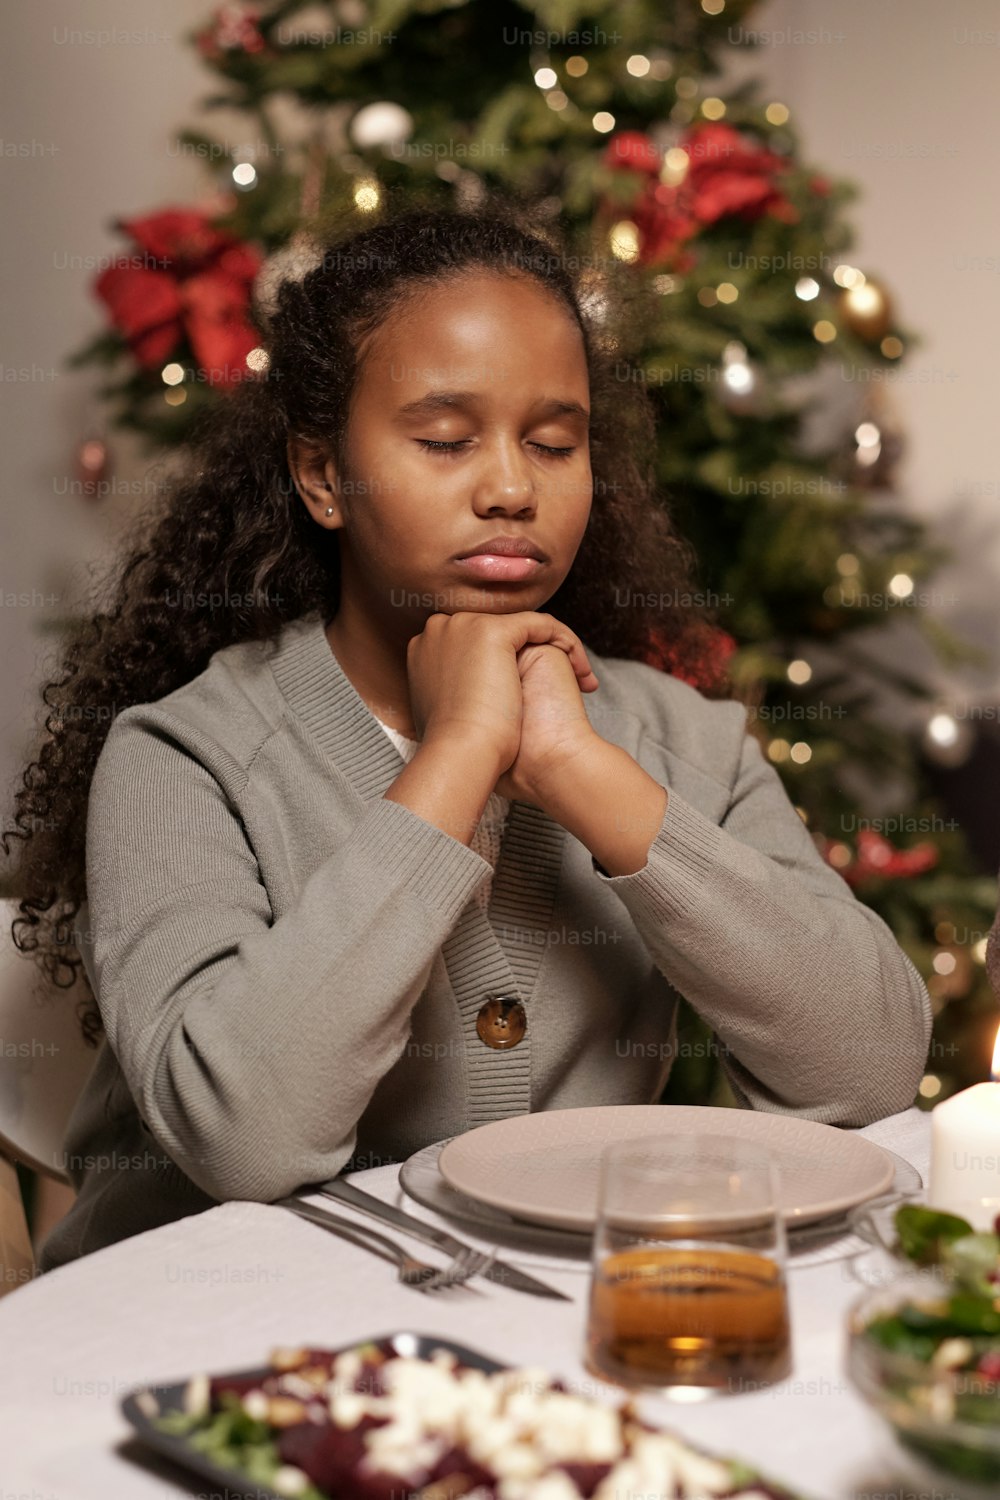 Cute biracial girl with her eyes closed and hands put together by chin praying by served table prepared for festive dinner